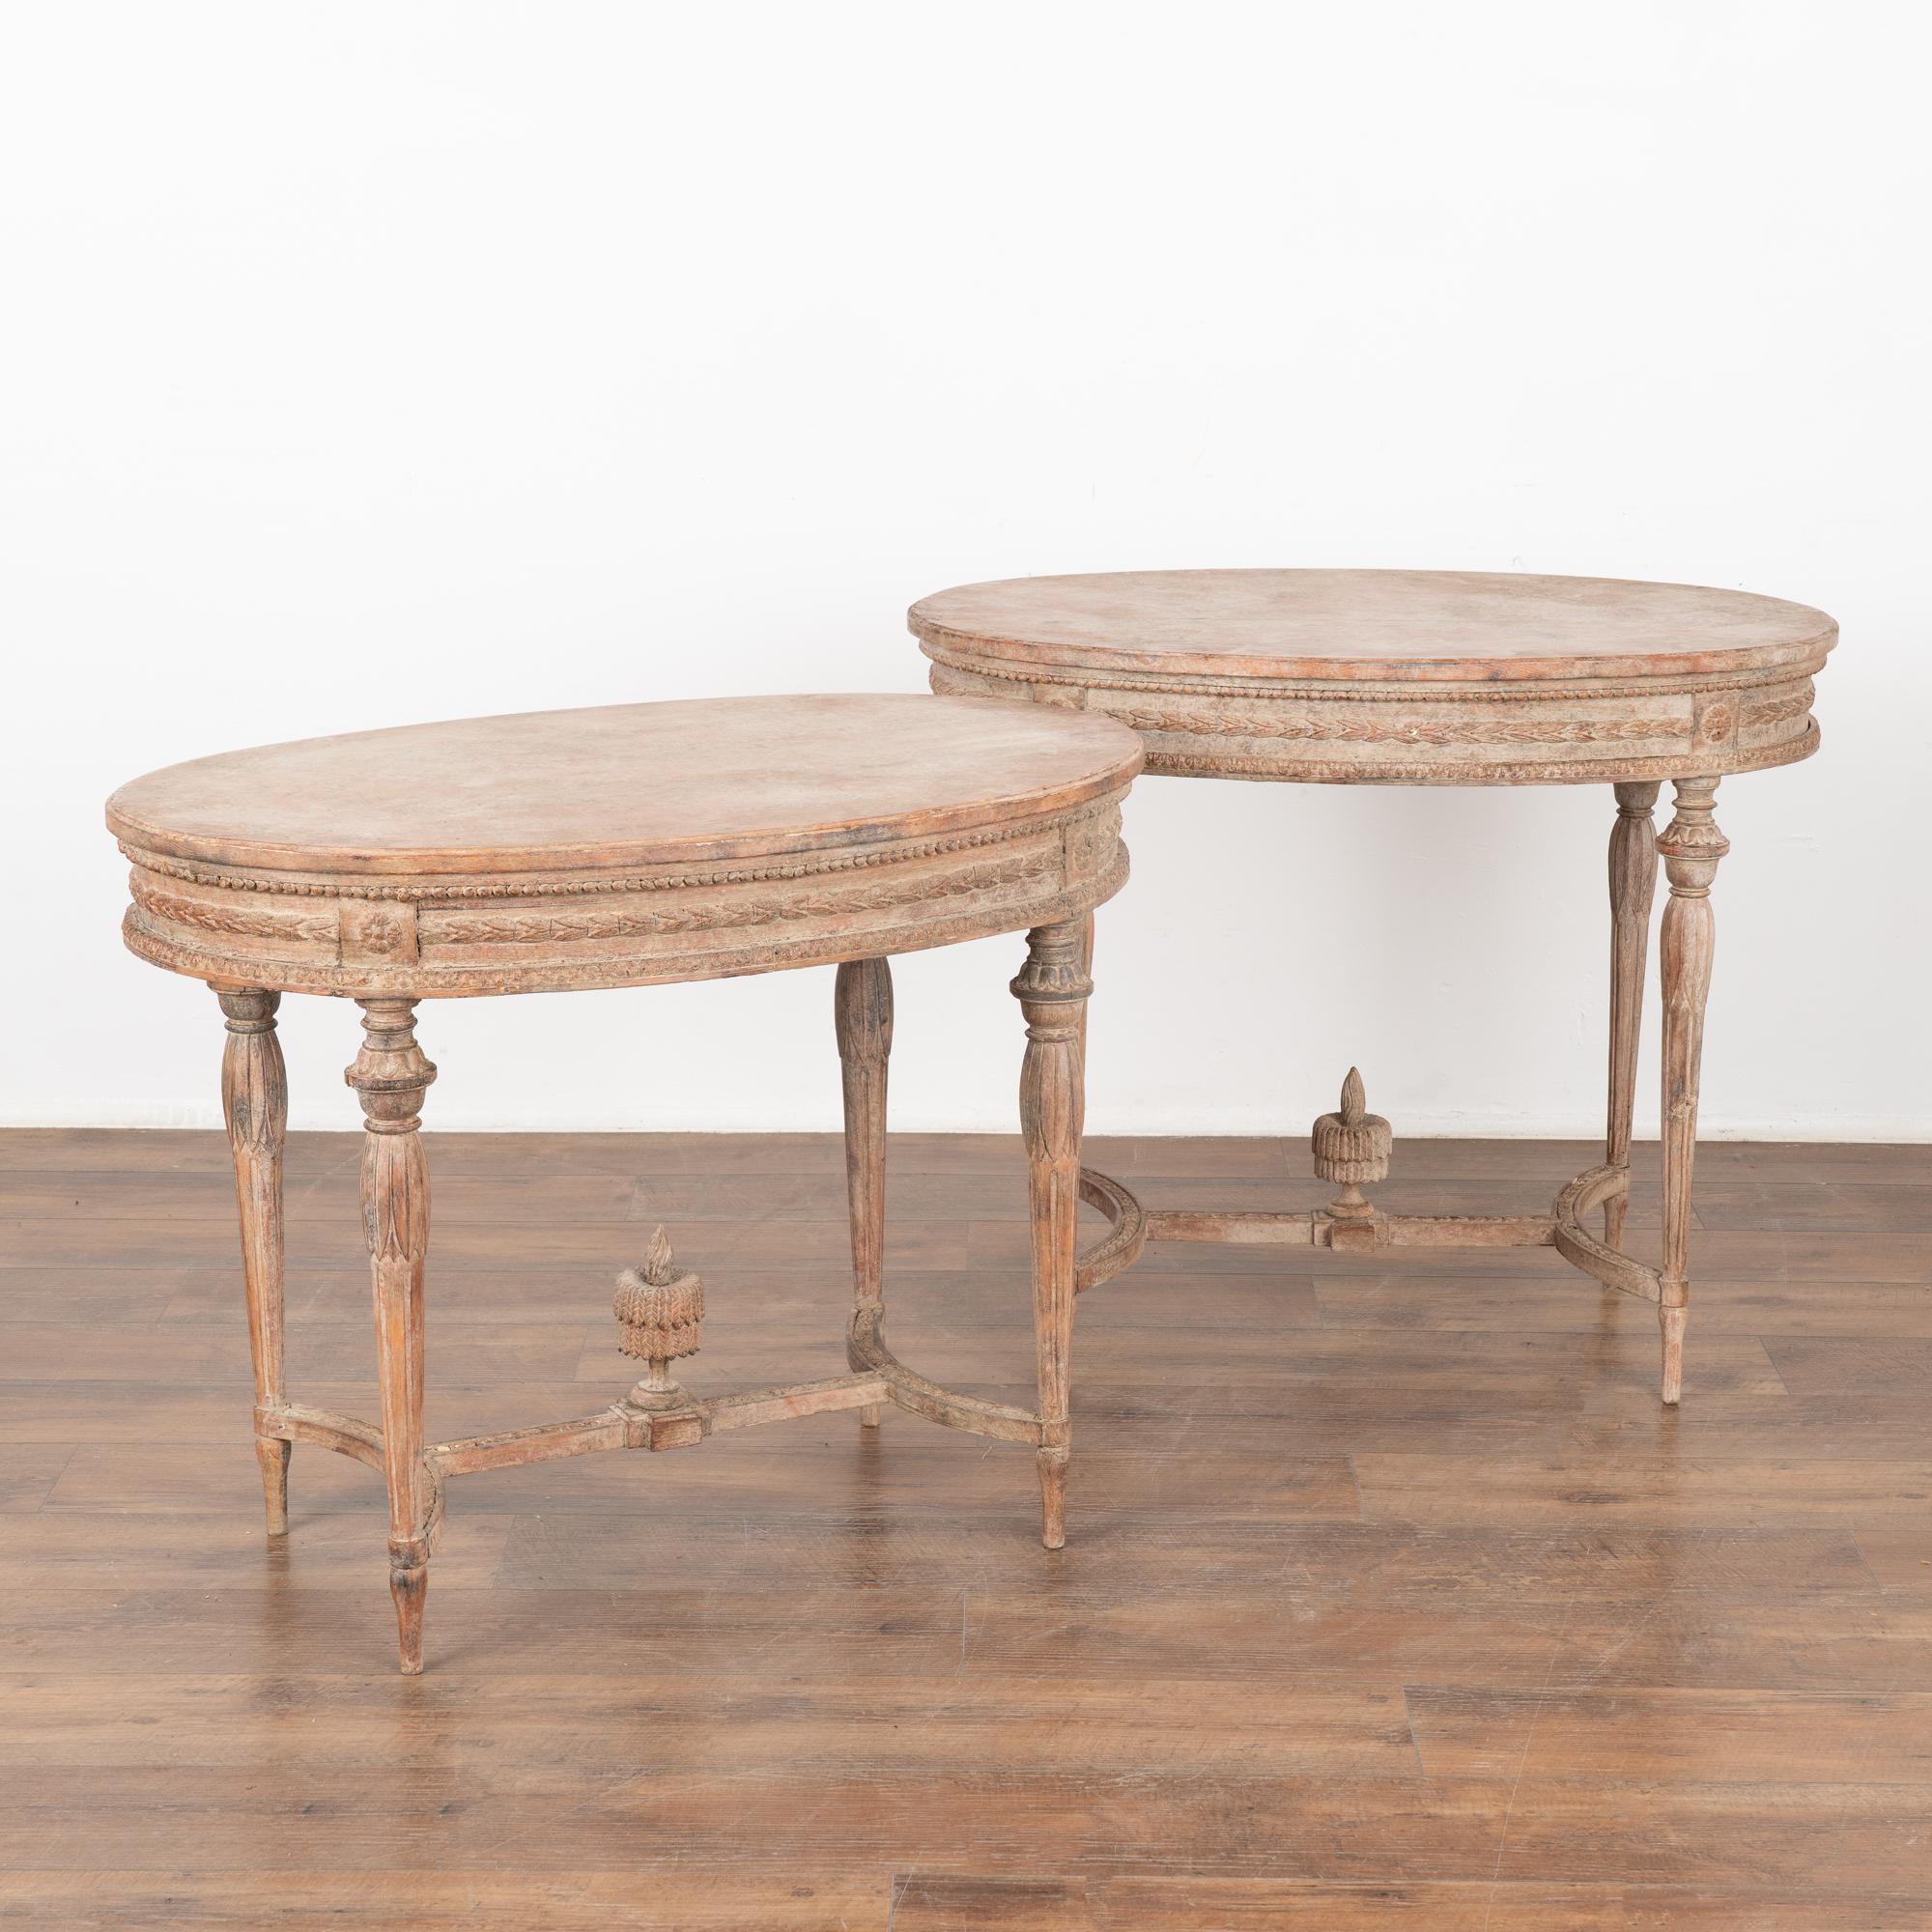 Pair of lovely oval side tables with turned legs, highly decorative carved skirt and finials above stretcher base.
Restored, later professionally painted in muted shades of rose, soft white and blush, all lightly distressed to fit the age and grace